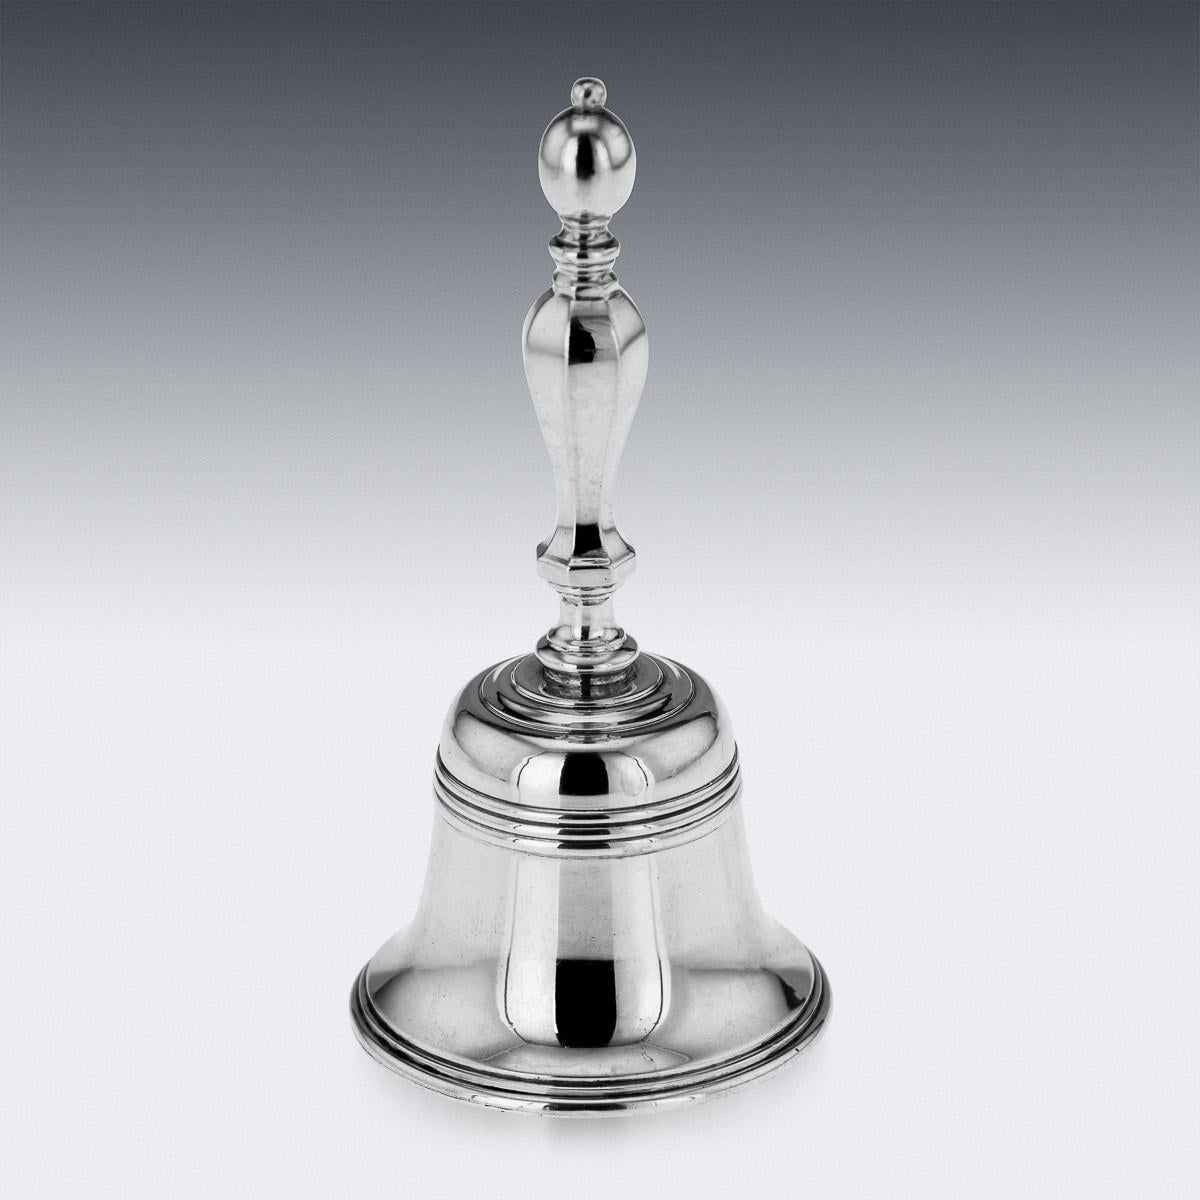 A superb 20th Century English solid silver desk or dinner bell. The bell, of a heavy guage, has a beaded body and beautifully shaped handle. This is the perfect addition to the drinks trolley, office, or dining table. Directly copying the form of